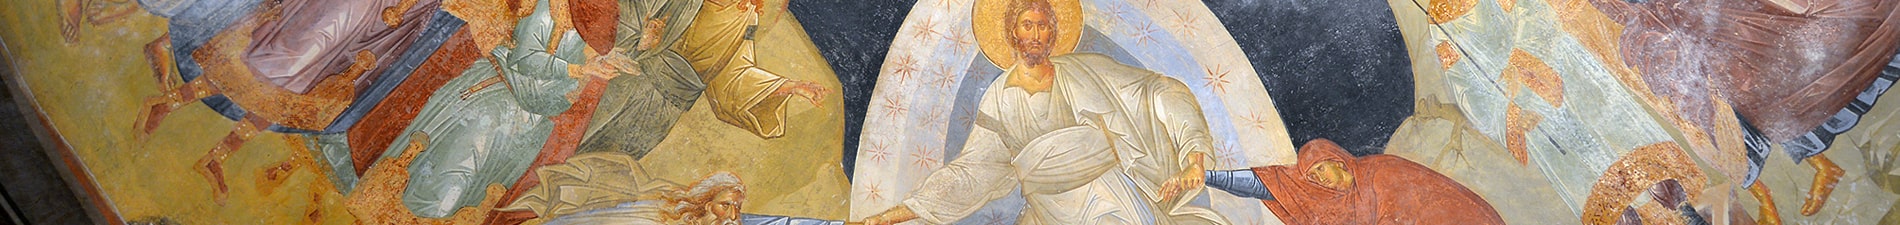 Angels Christian Icons